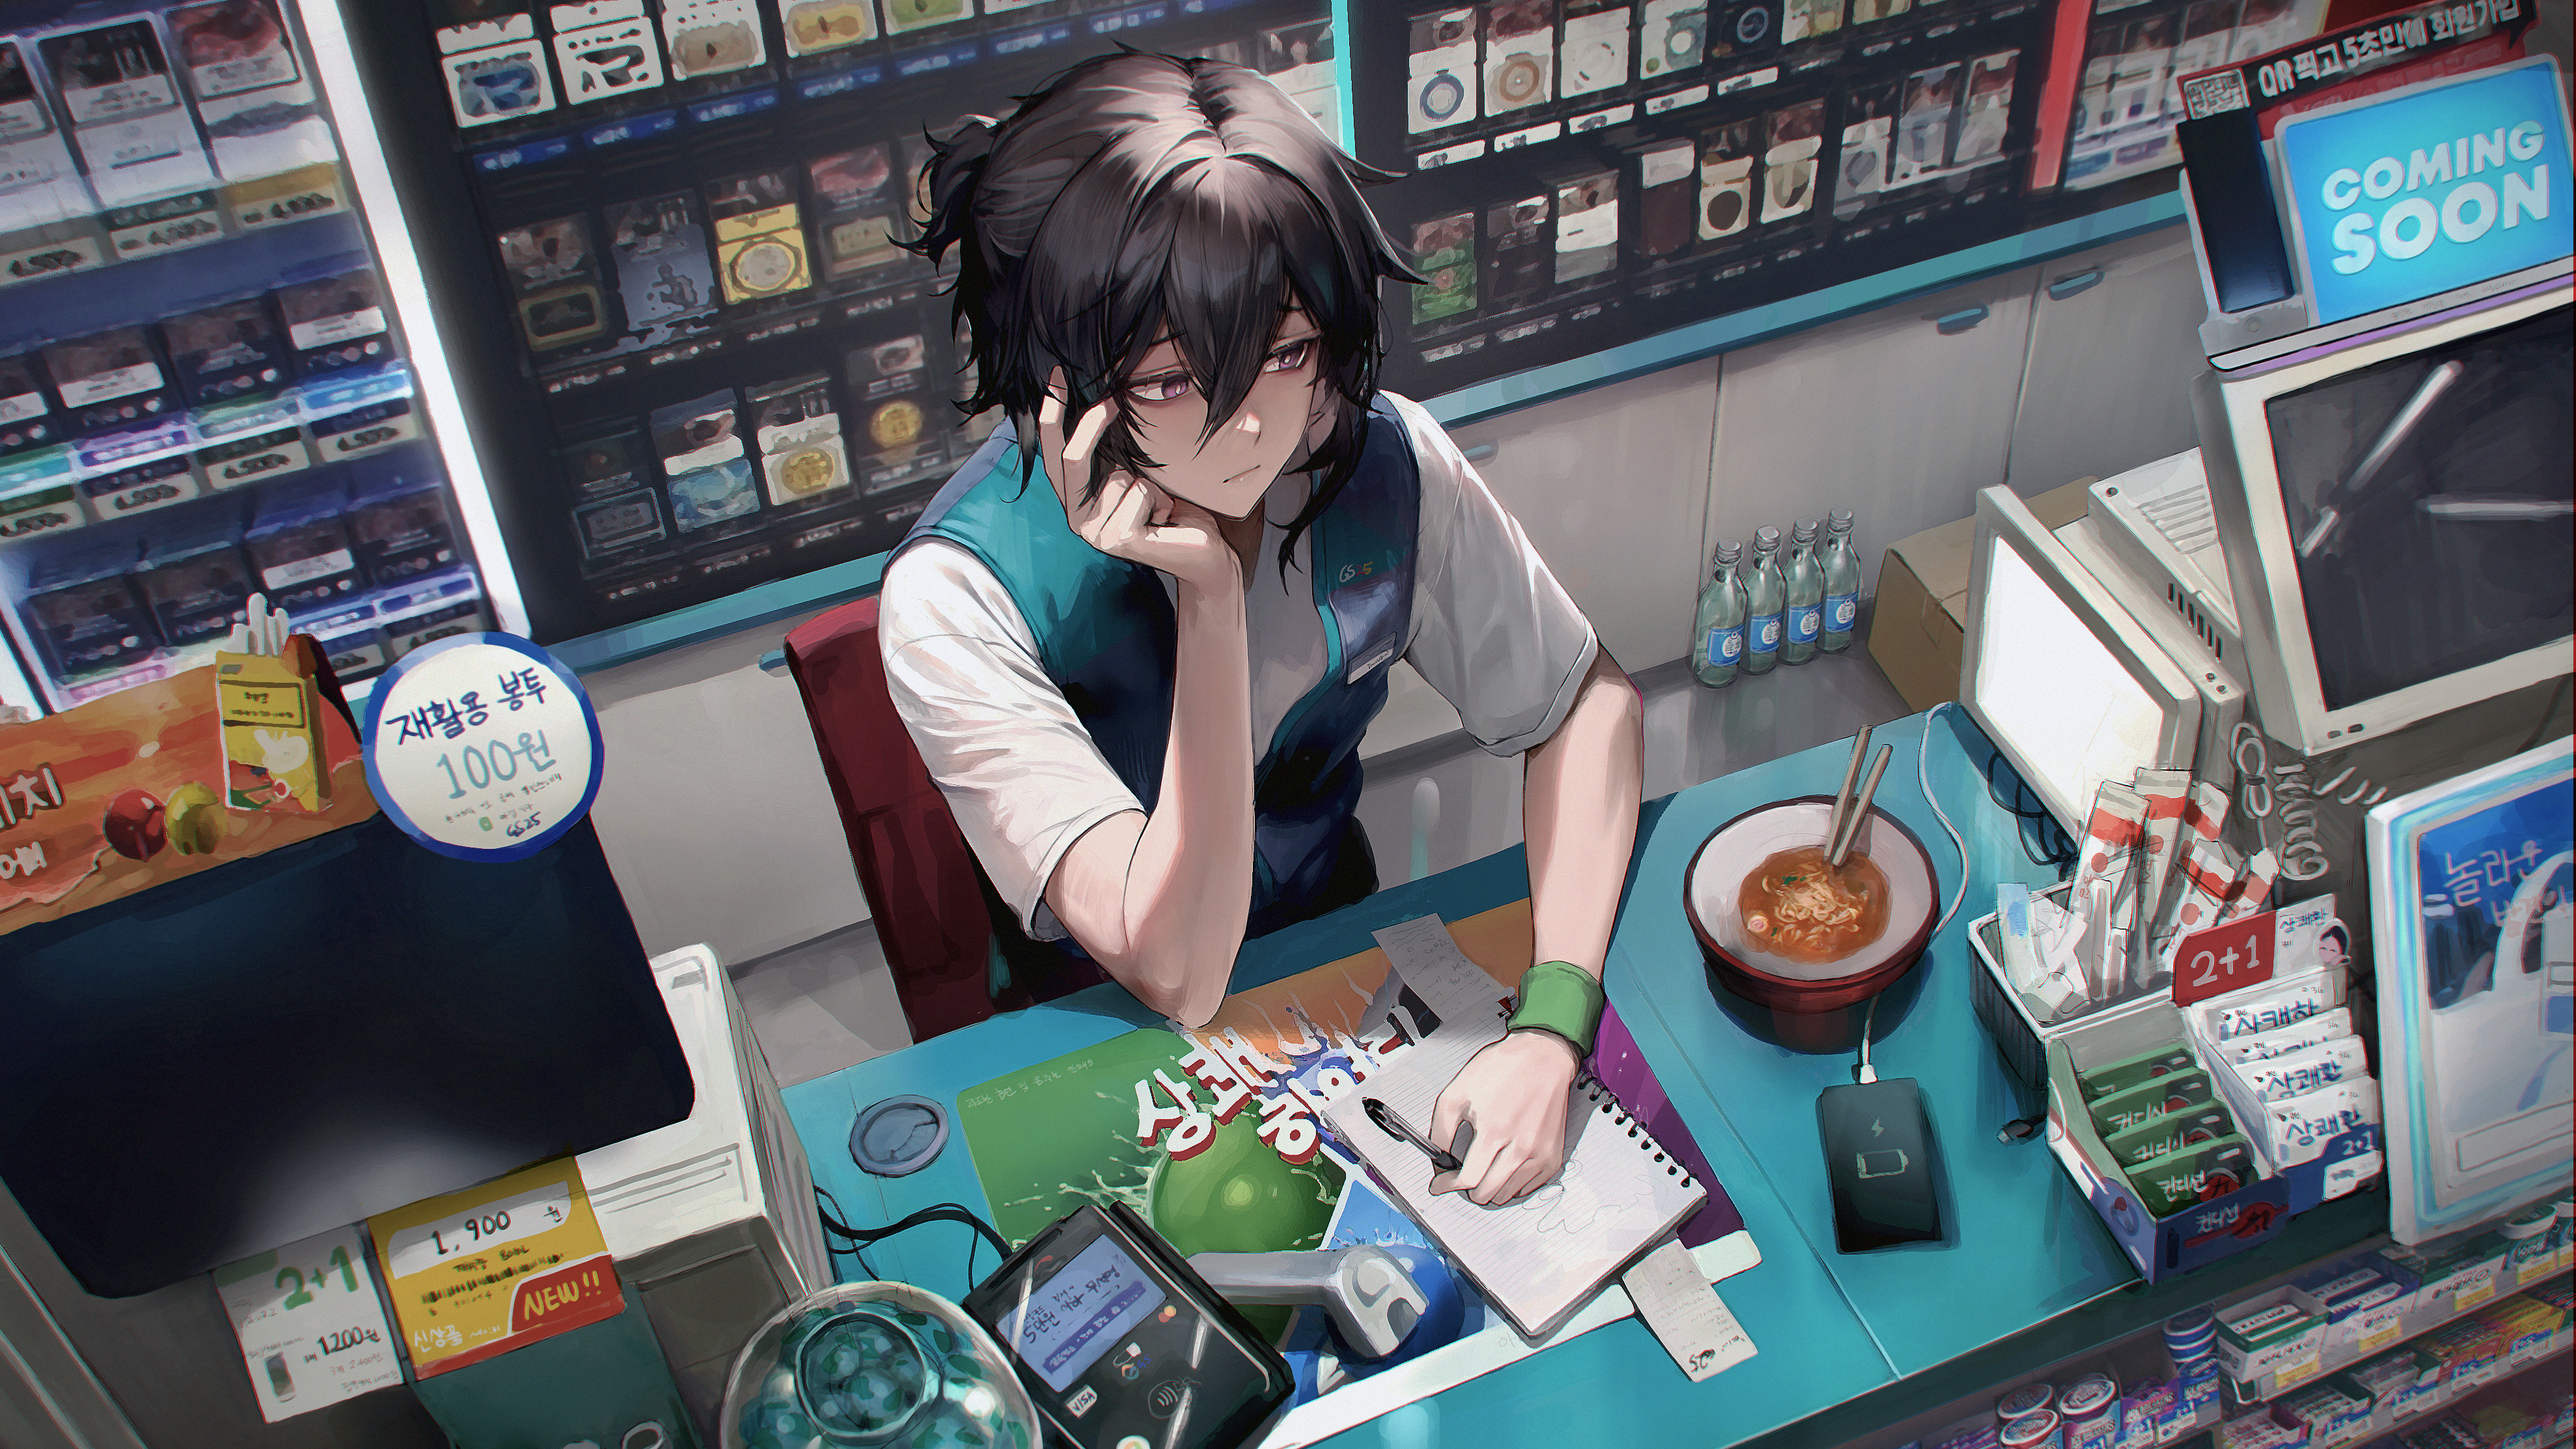 Anime Anime Boys Products Ramen Stores Notebooks Sitting Hand On Face Korean Uniform Food Looking Aw 3958x2226